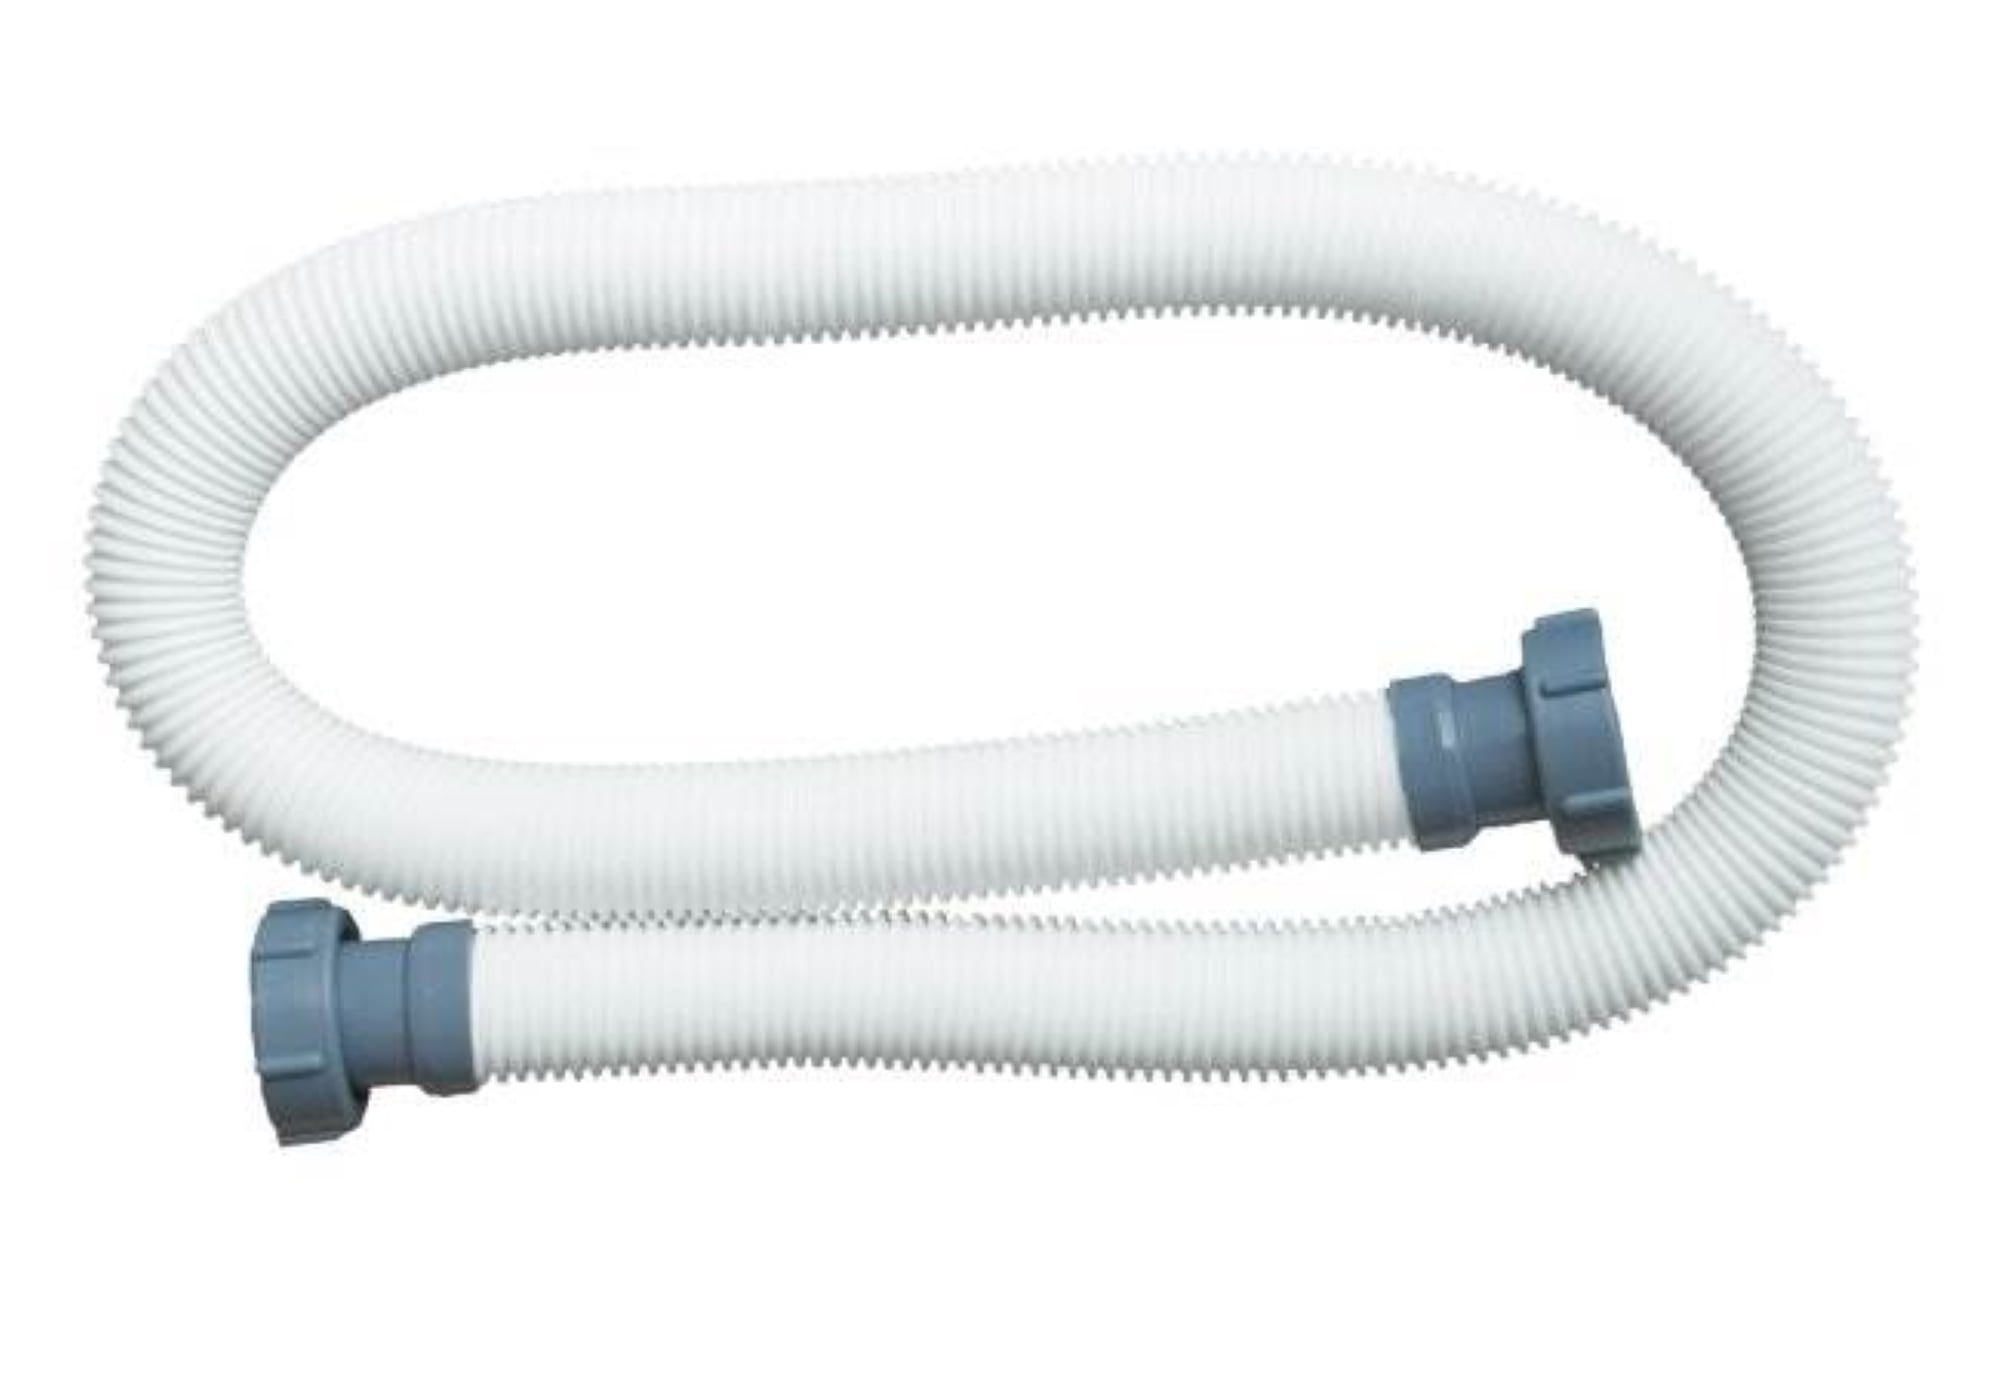 Y-Connection 32 38 Adapter Suction Hose Pool Hose Connector Intex 